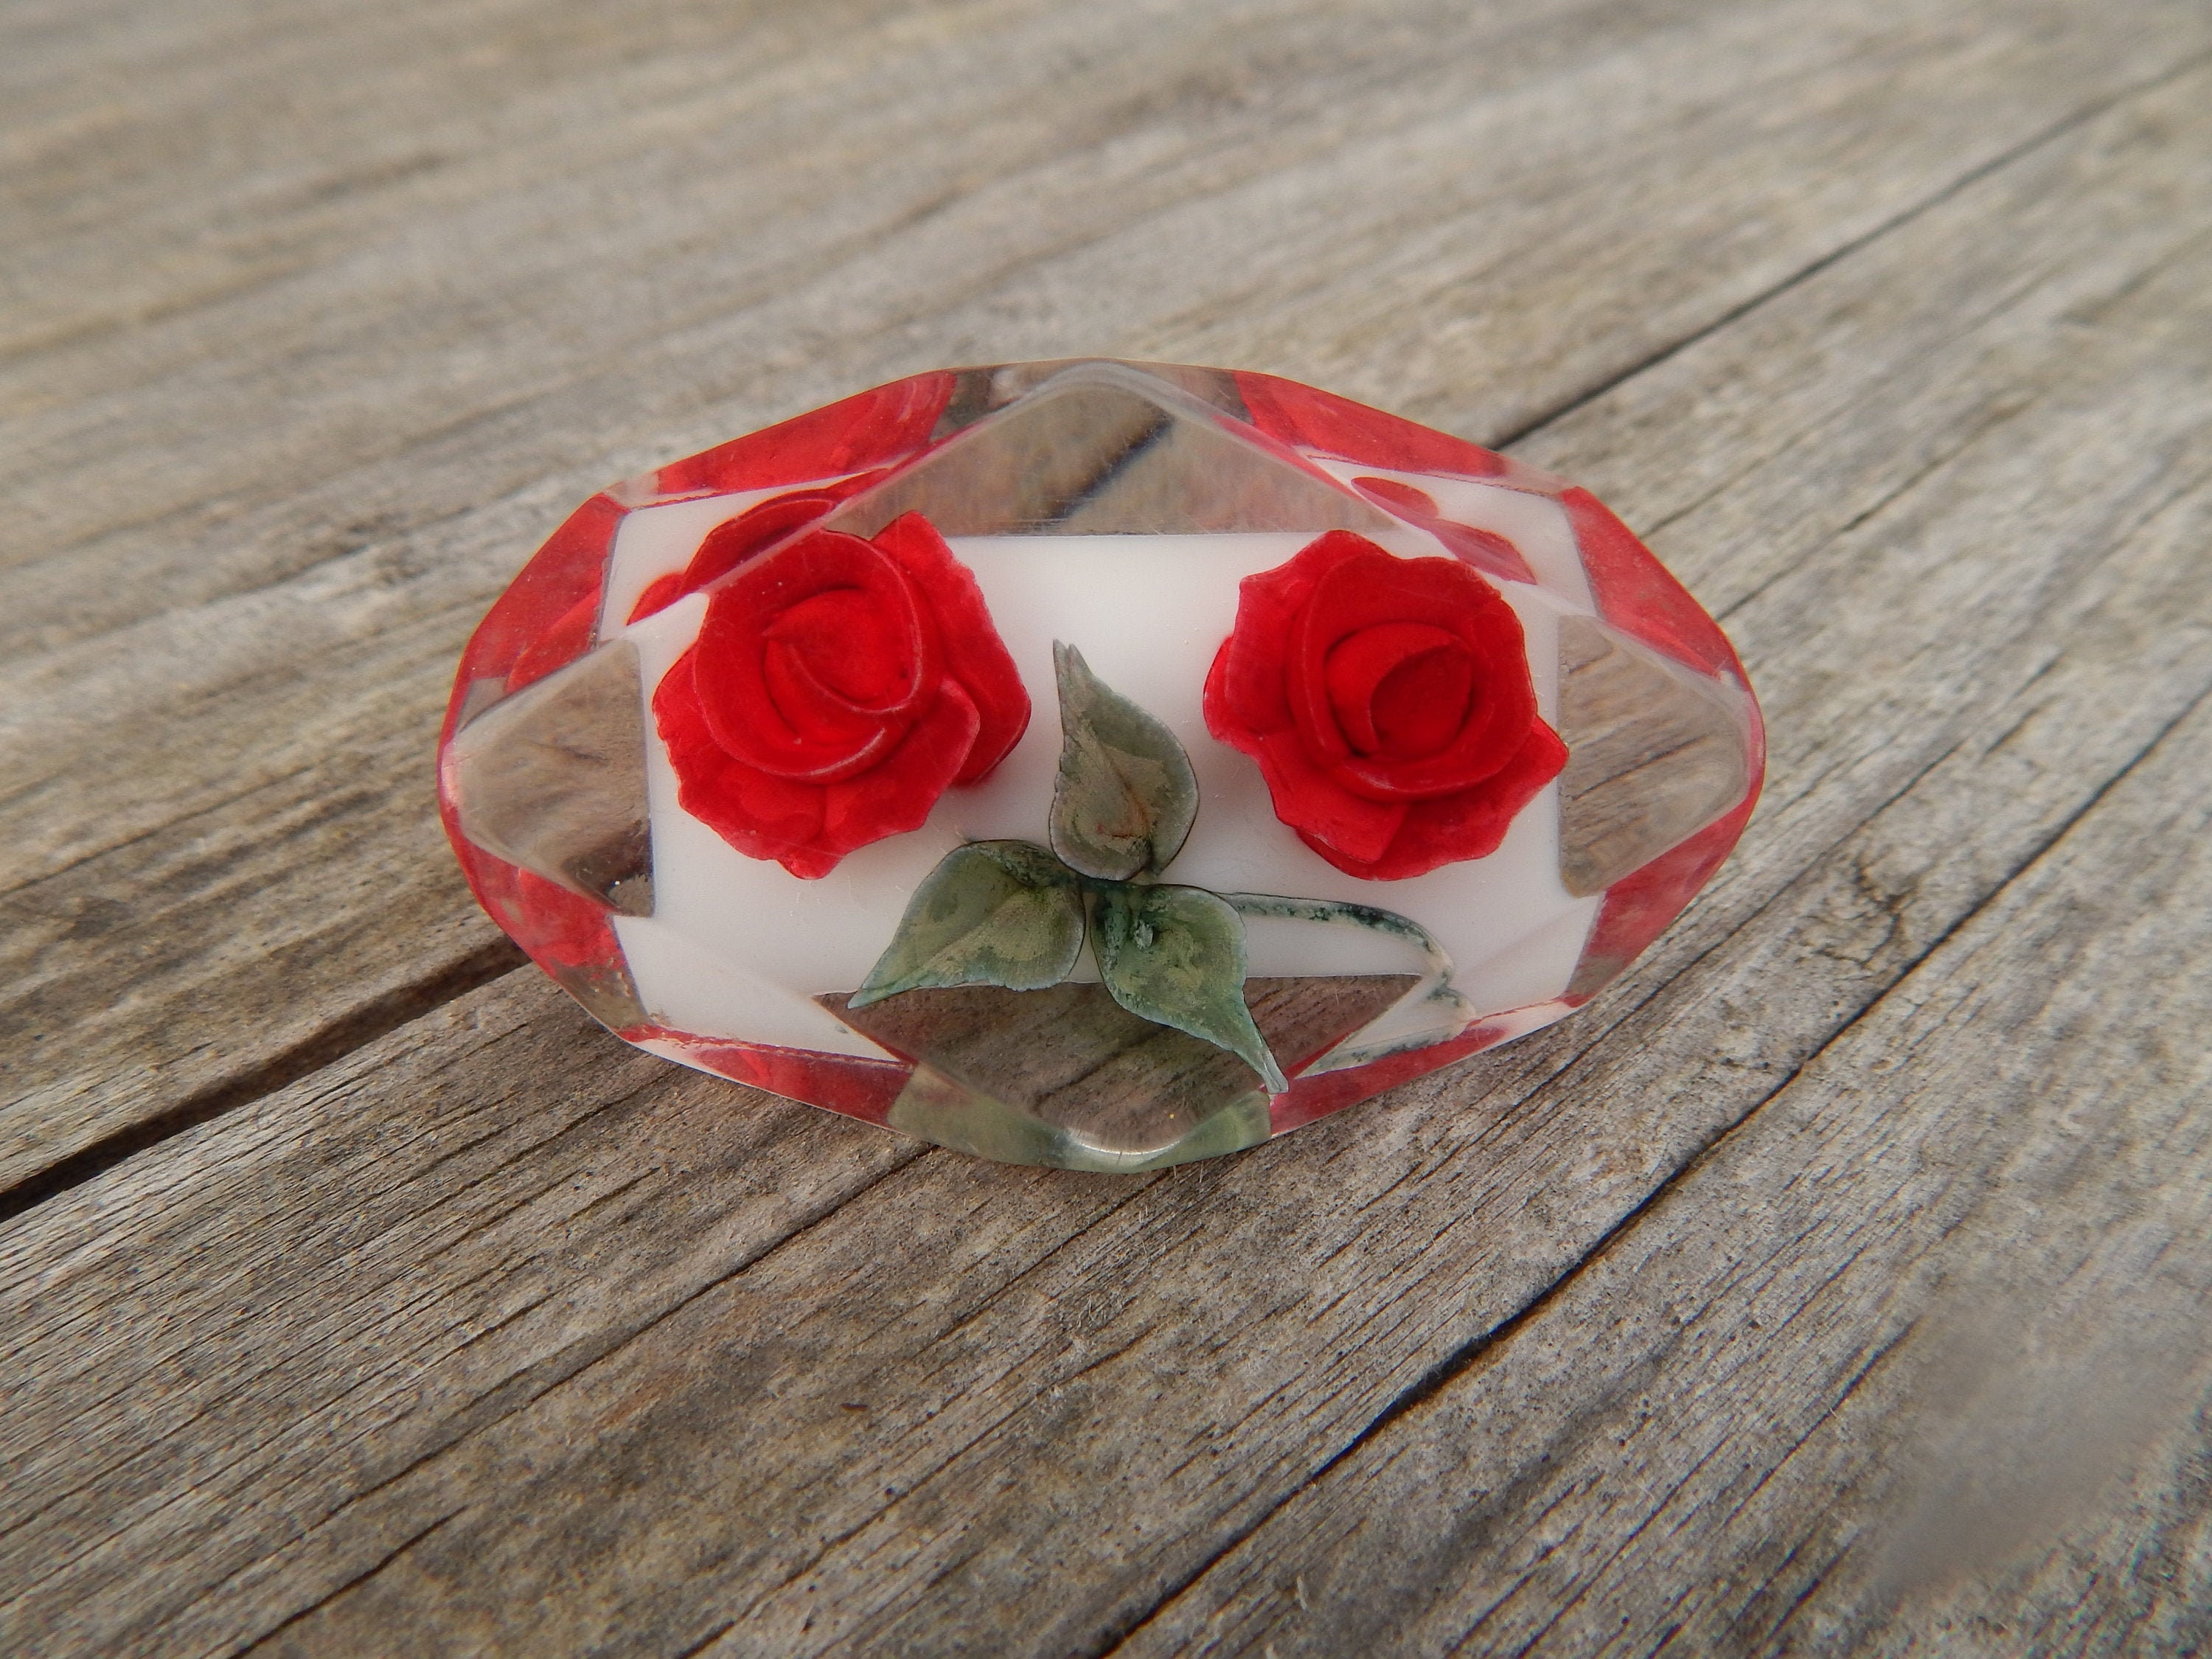 Vintage Brooch, Rose Pin, Flower Jewelry, Vintage Pin, Glass Rose